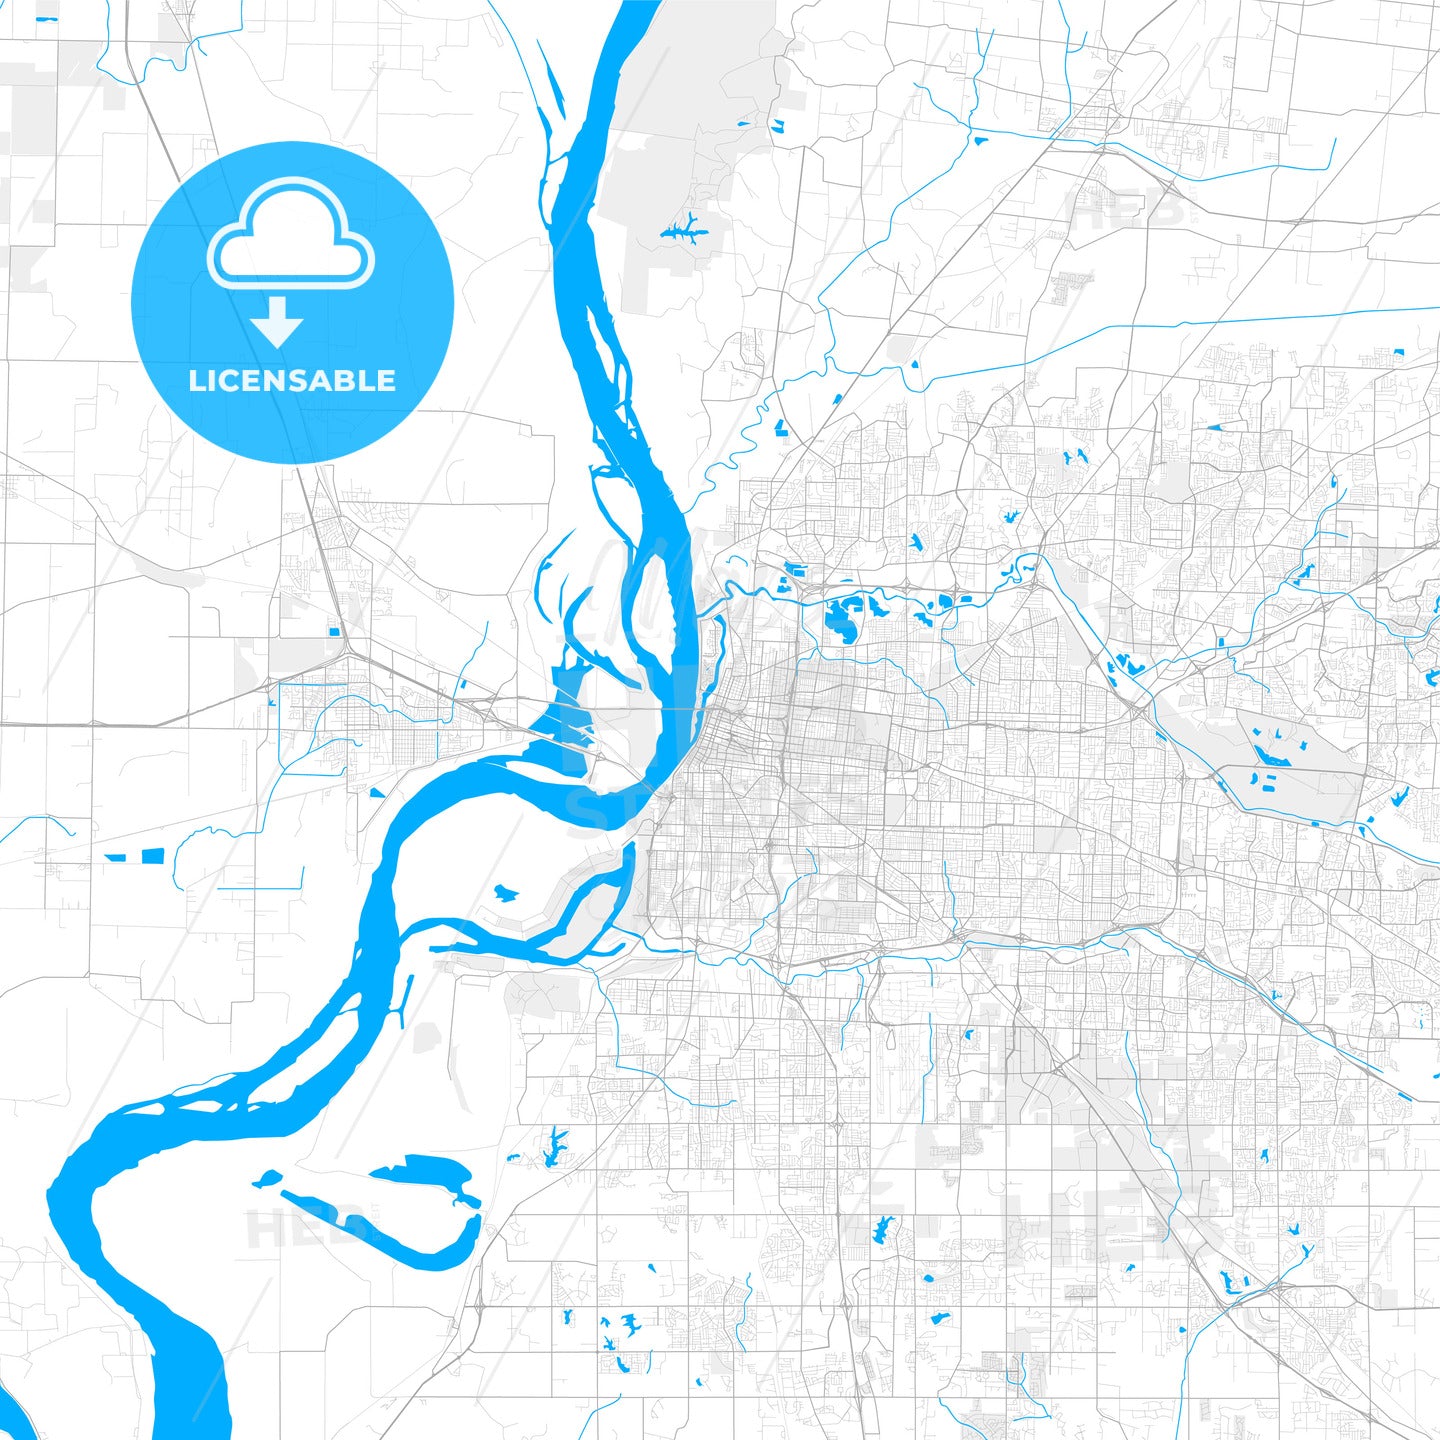 Rich detailed vector map of Memphis, Tennessee, U.S.A.